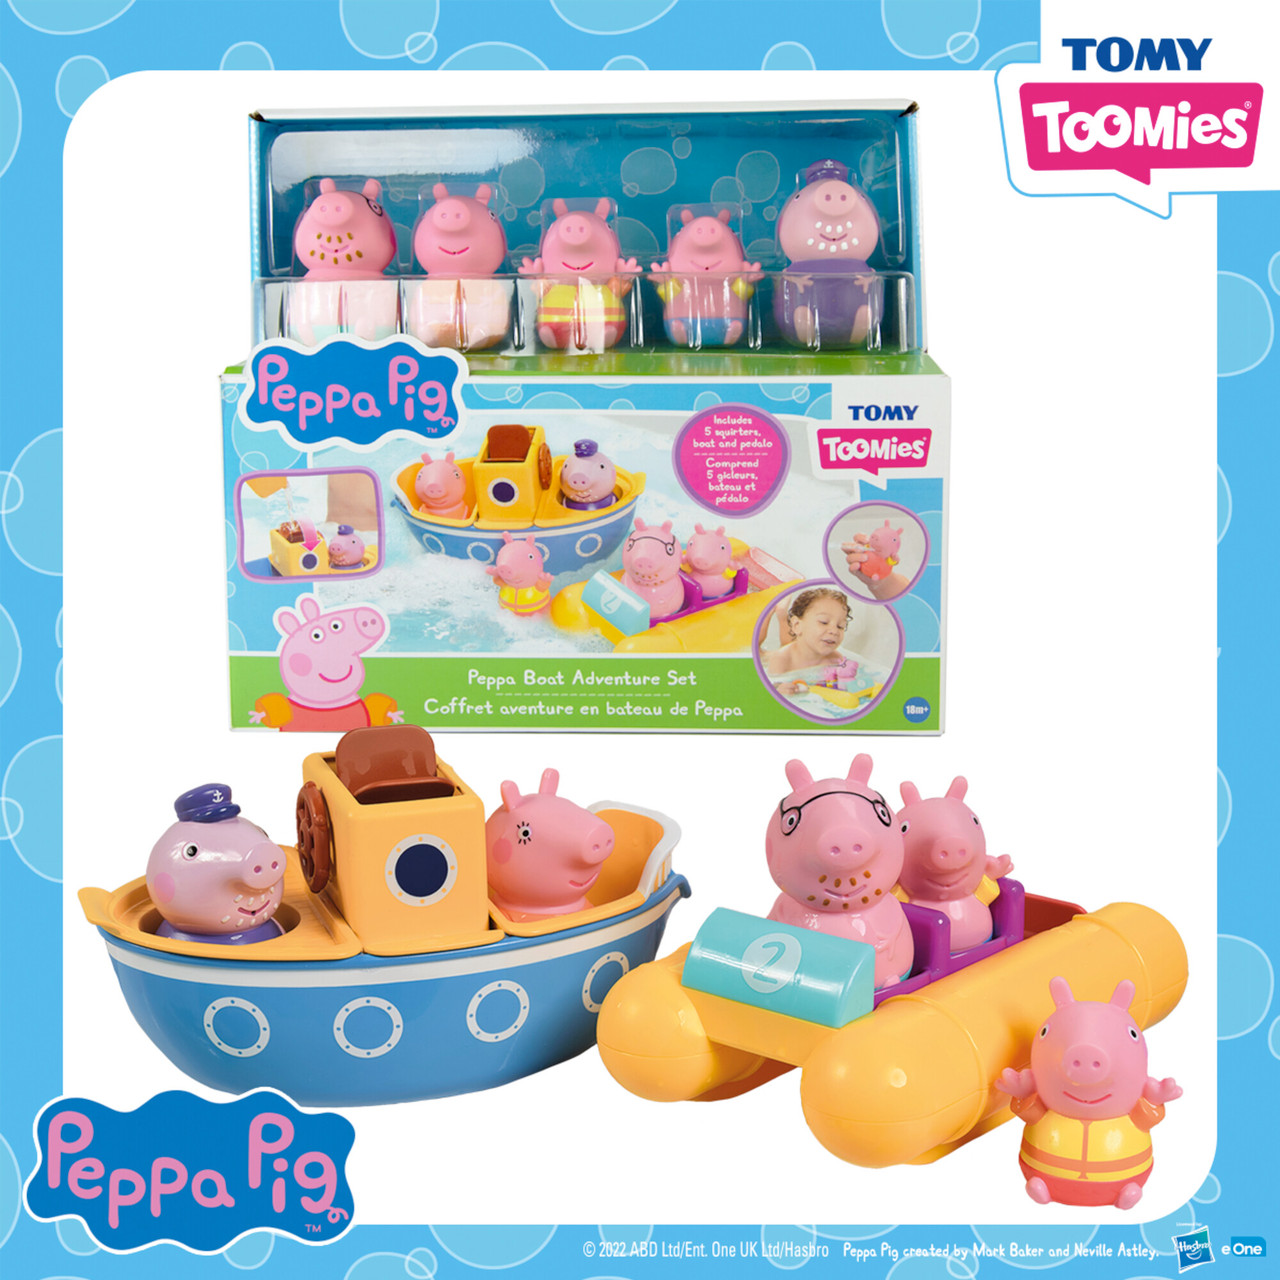 Peppa Pig Peppa's Adventures Little Boat Toy Includes 3-inch George Pig  Figure, Inspired by The TV Show, for Preschoolers Ages 3 and Up